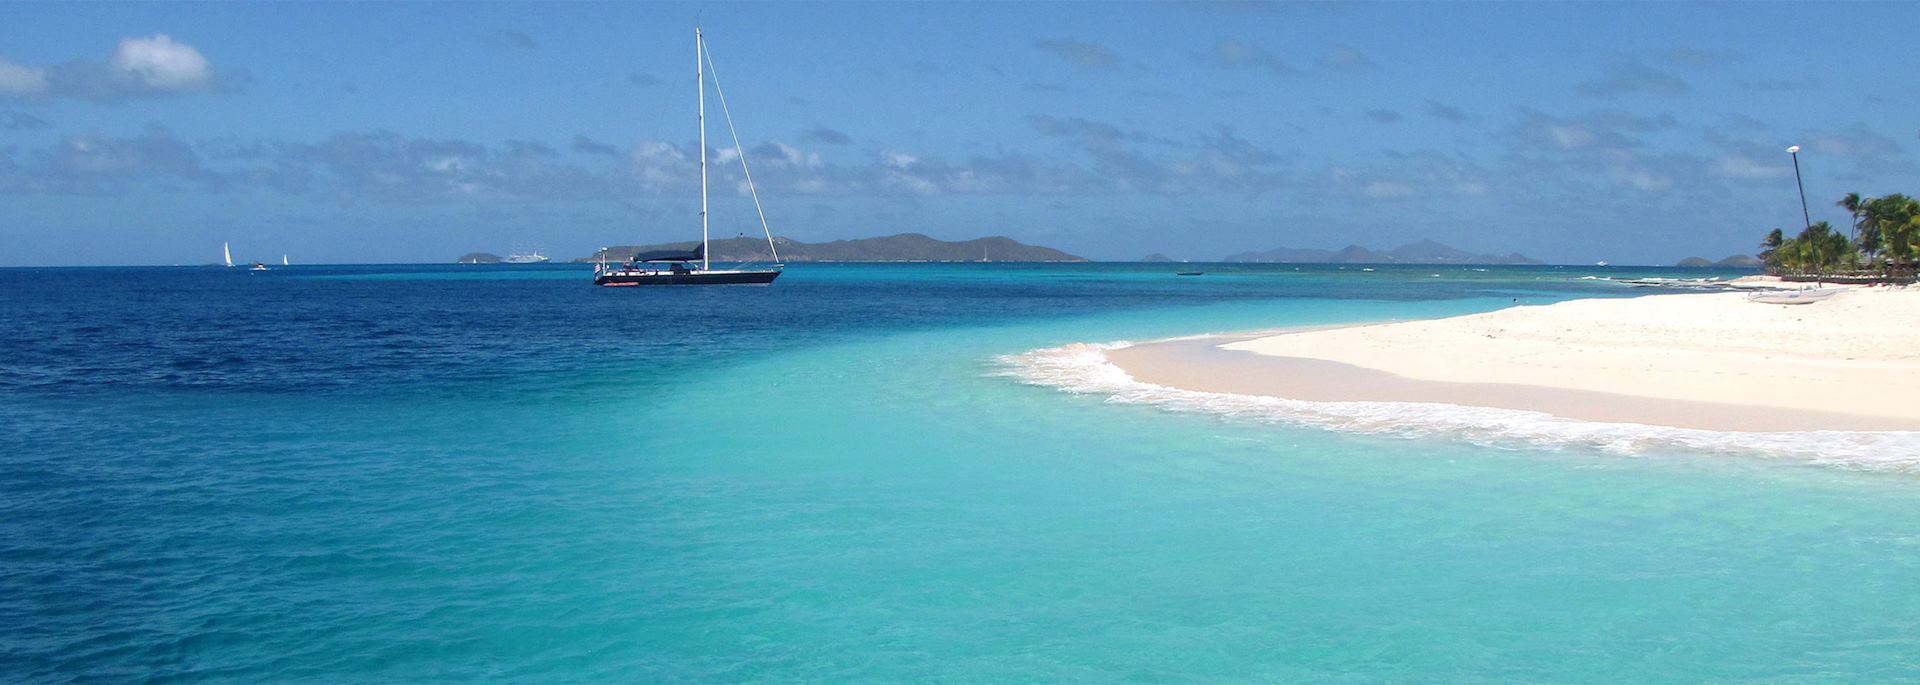 Palm Island, St Vincent and the Grenadines